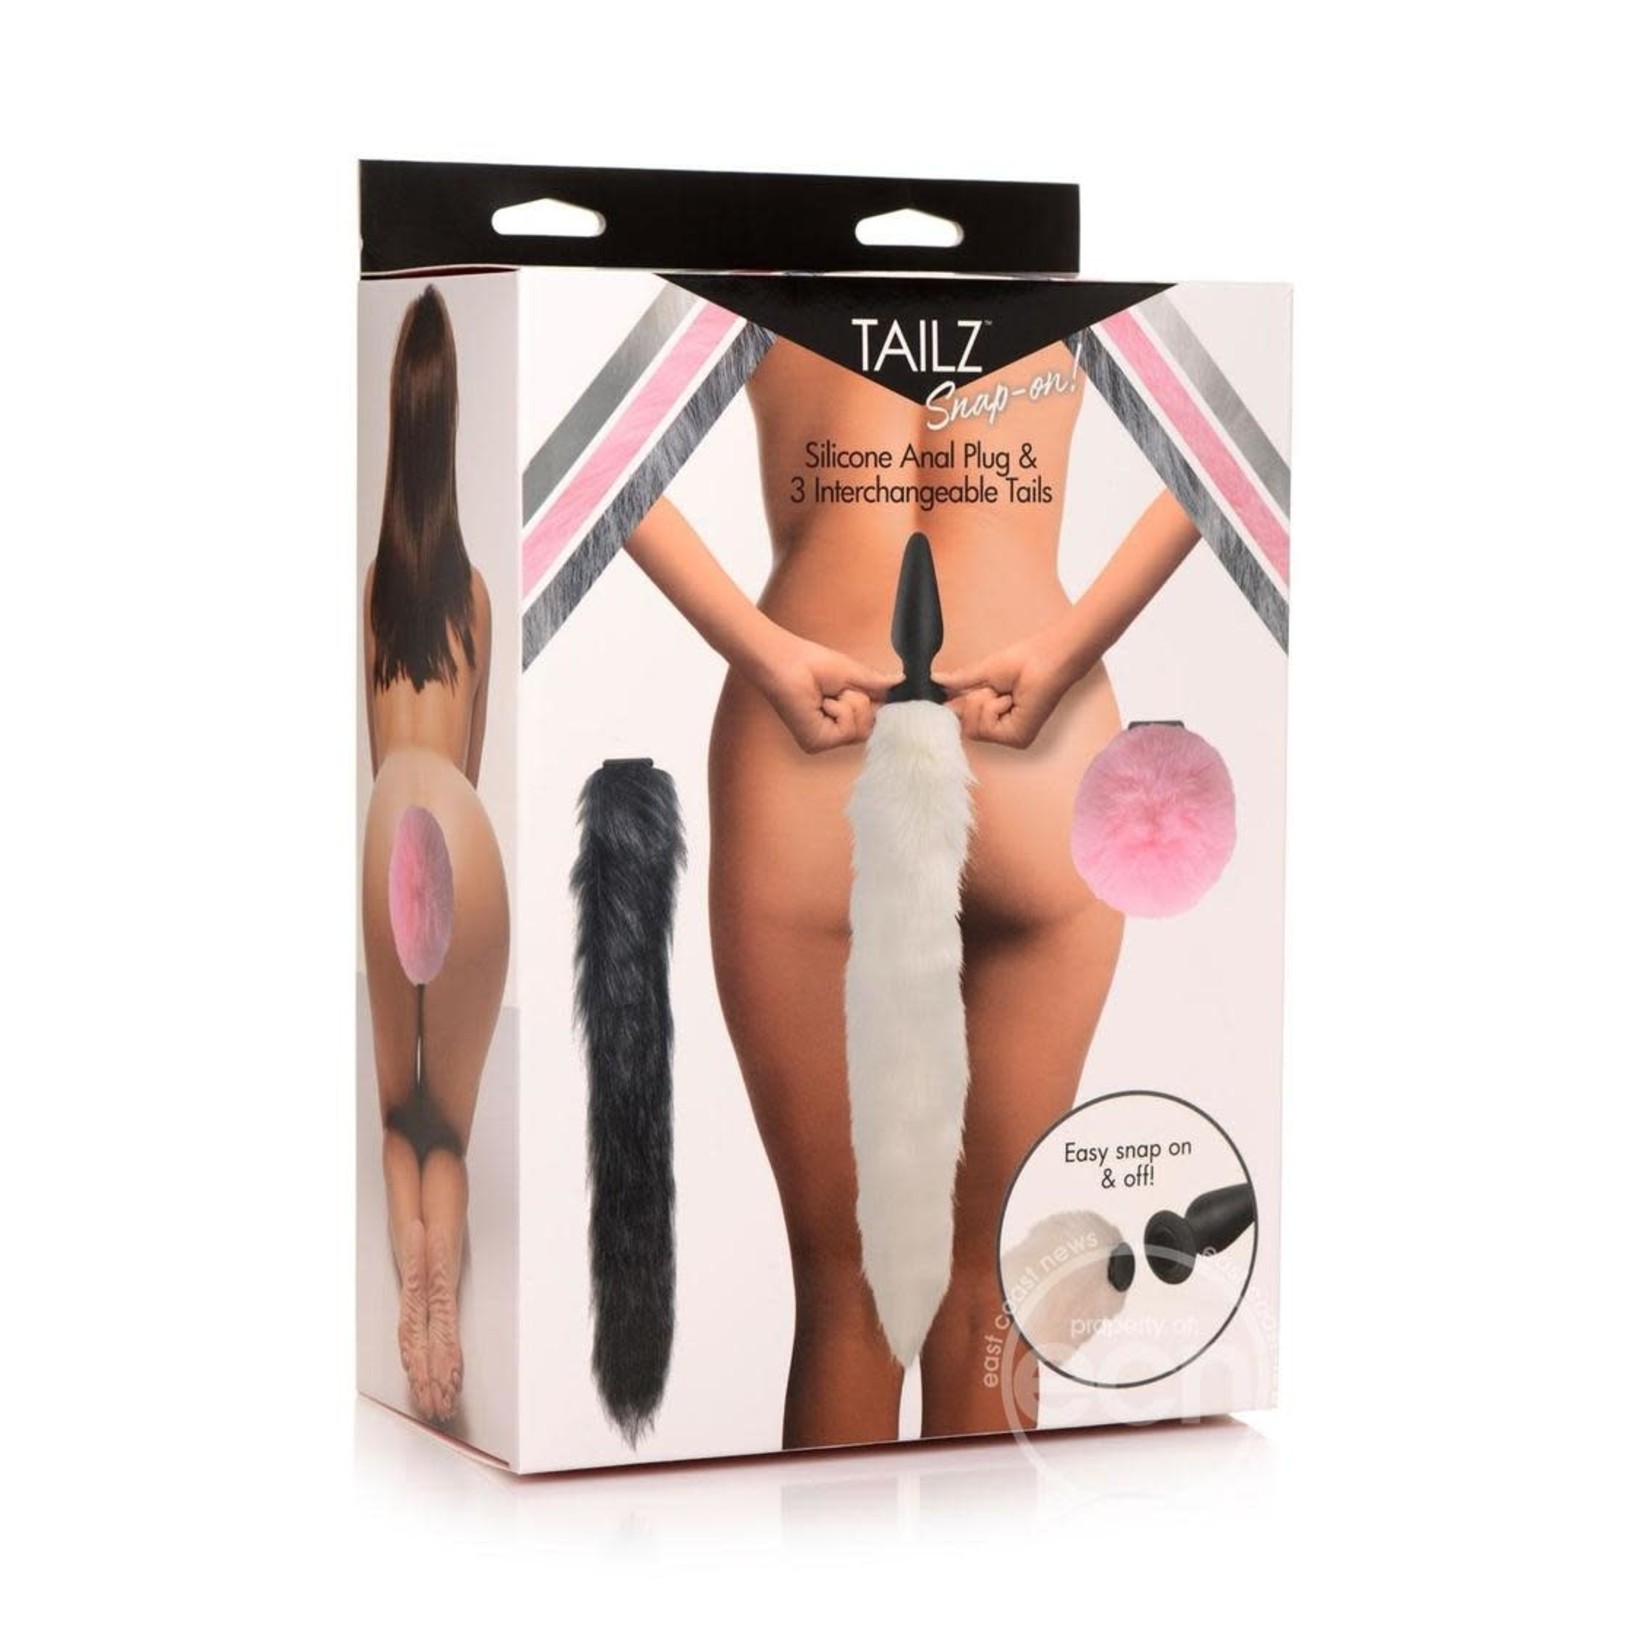 Tailz Tailz Silicone Anal Plug & 3 Interchangeable Tails Set - Assorted Colors